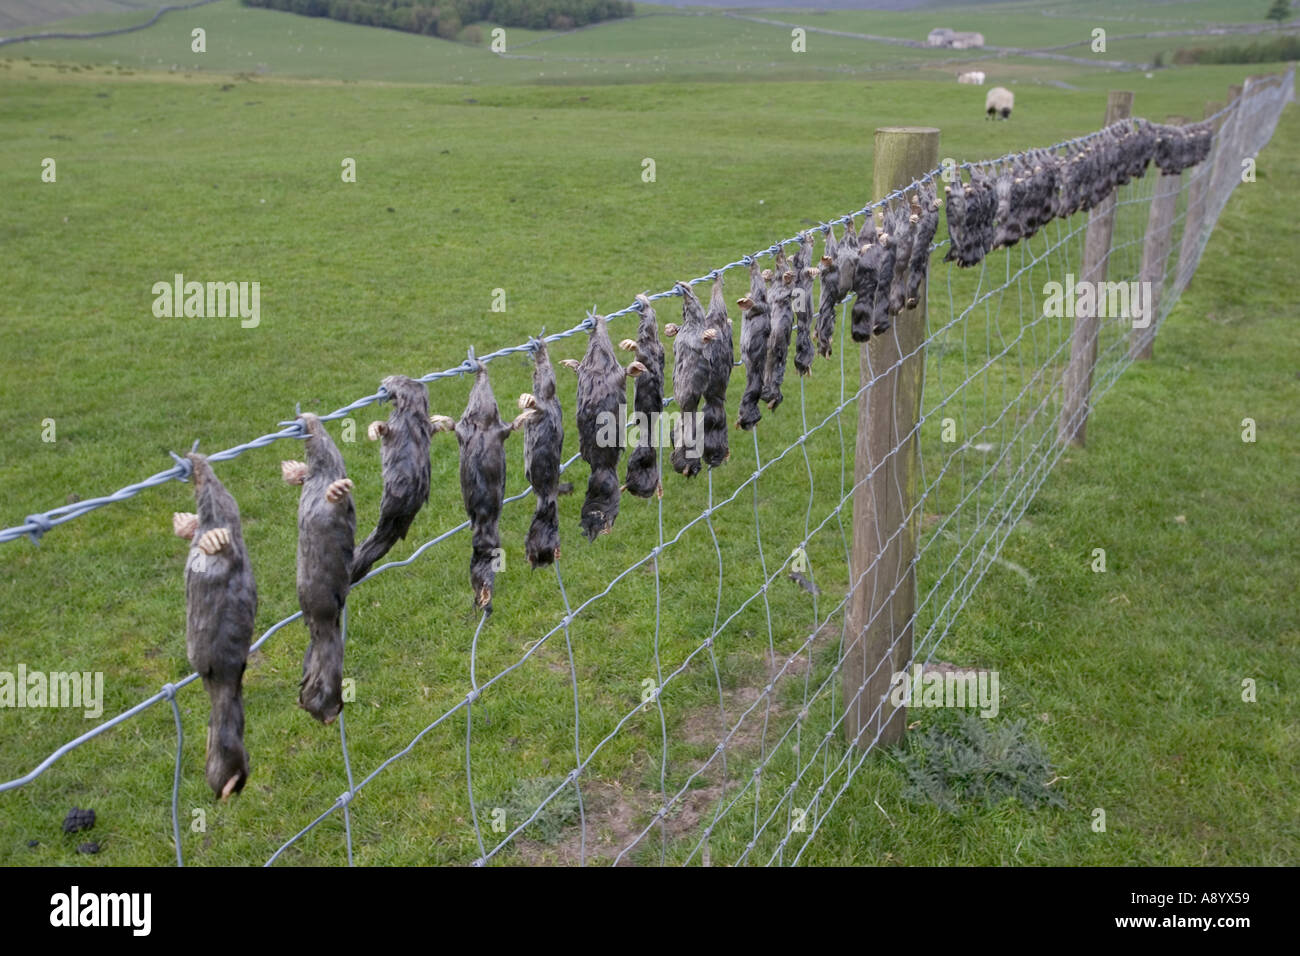 Dead moles hung on barbed wire fence near Setlle Yorkshire UK Stock Photo